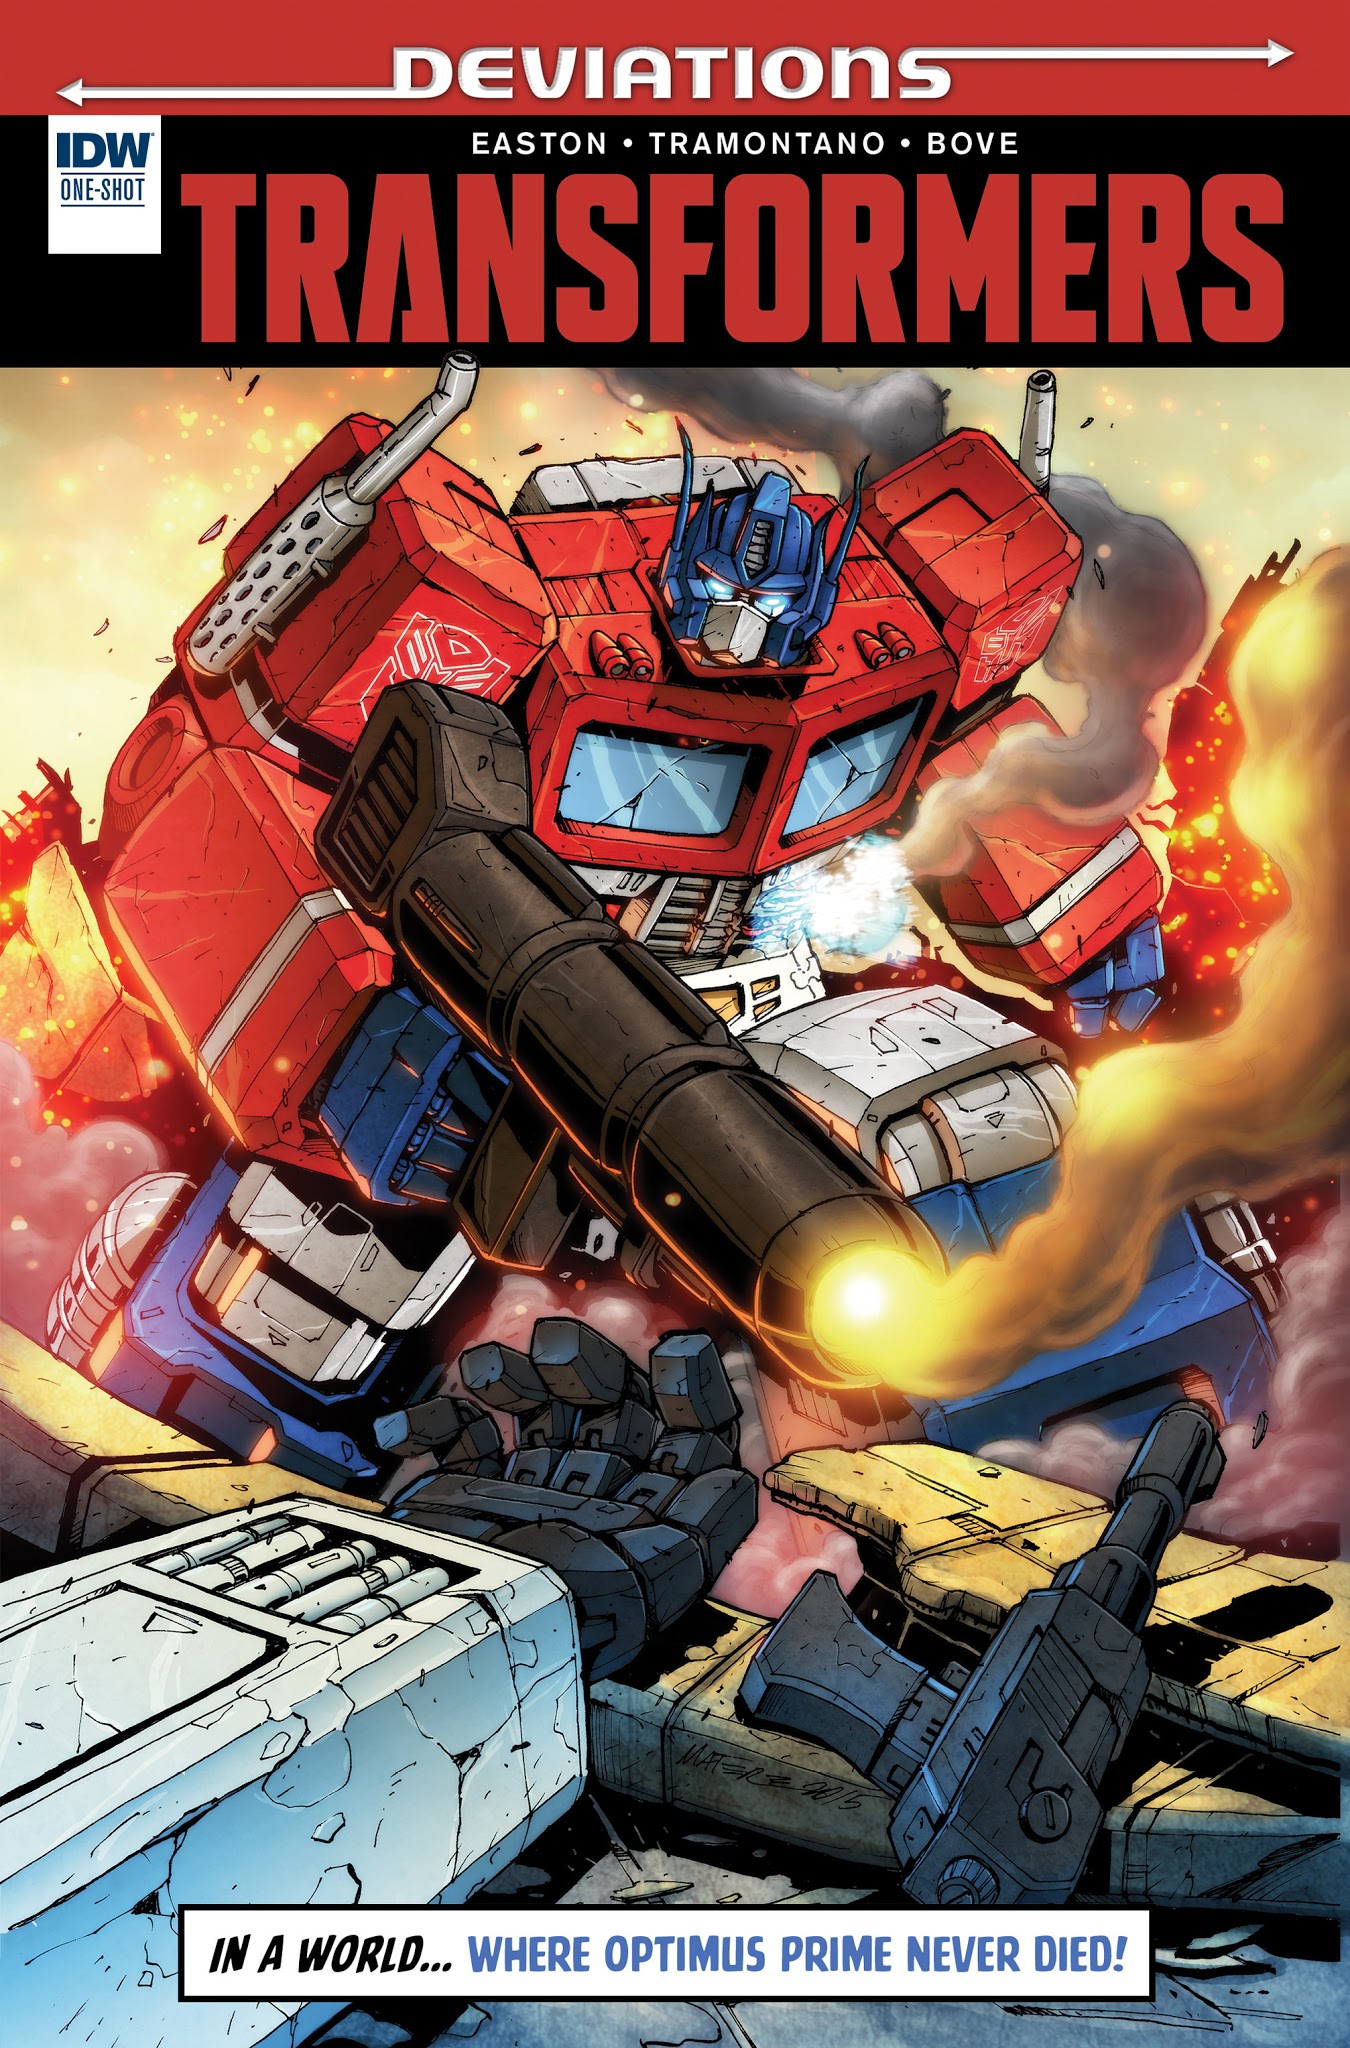 Read online Transformers: Deviations comic -  Issue # Full - 1